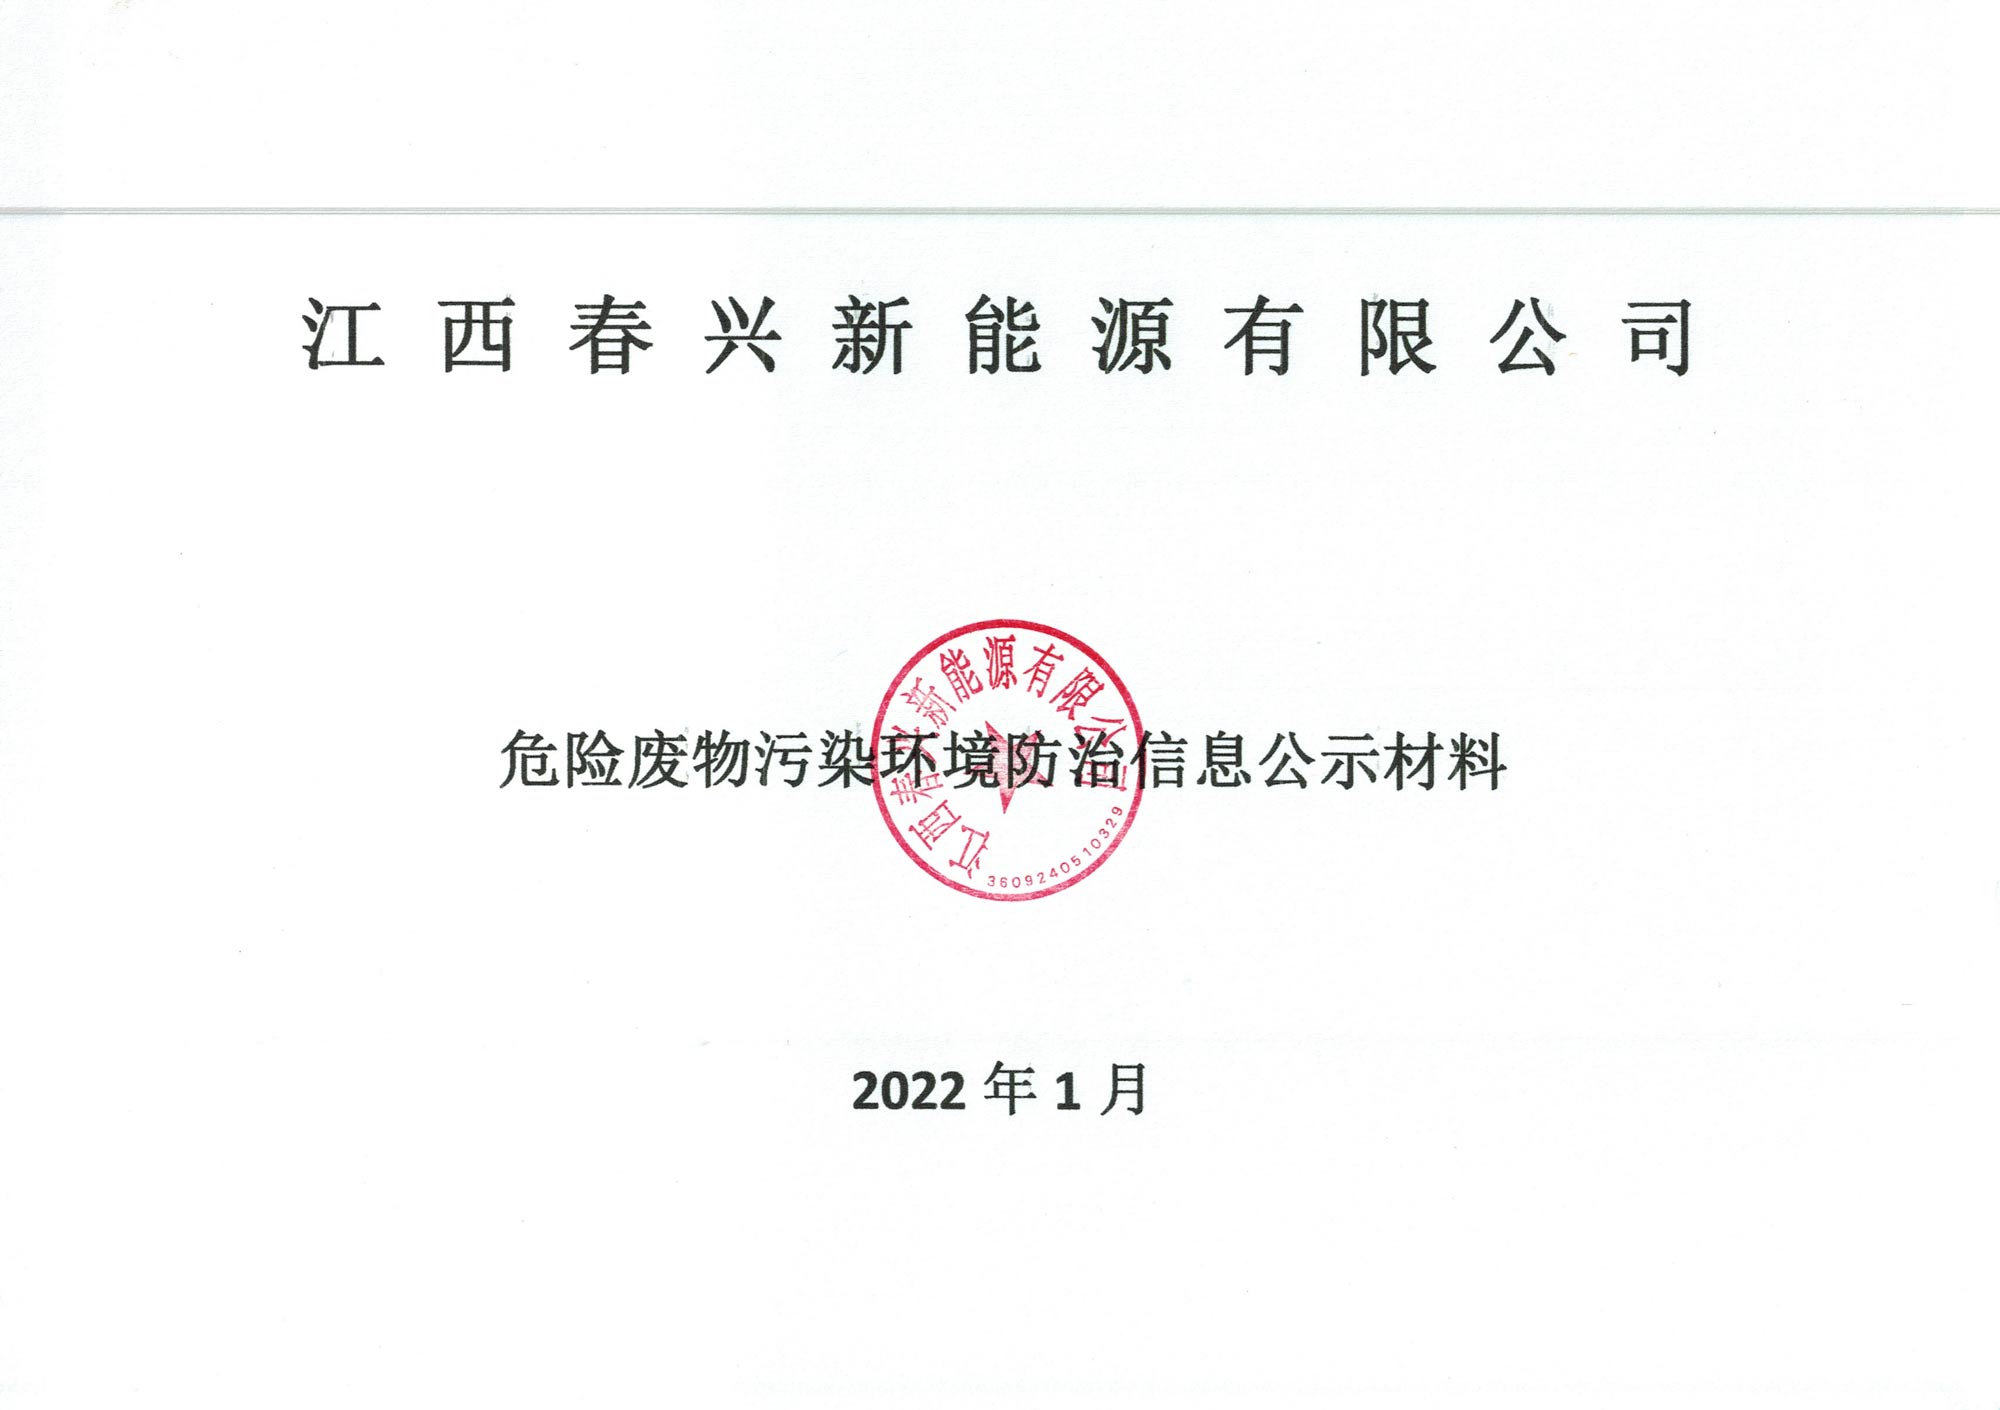 Publicity on prevention and control of environmental pollution by hazardous wastes (January 2022)